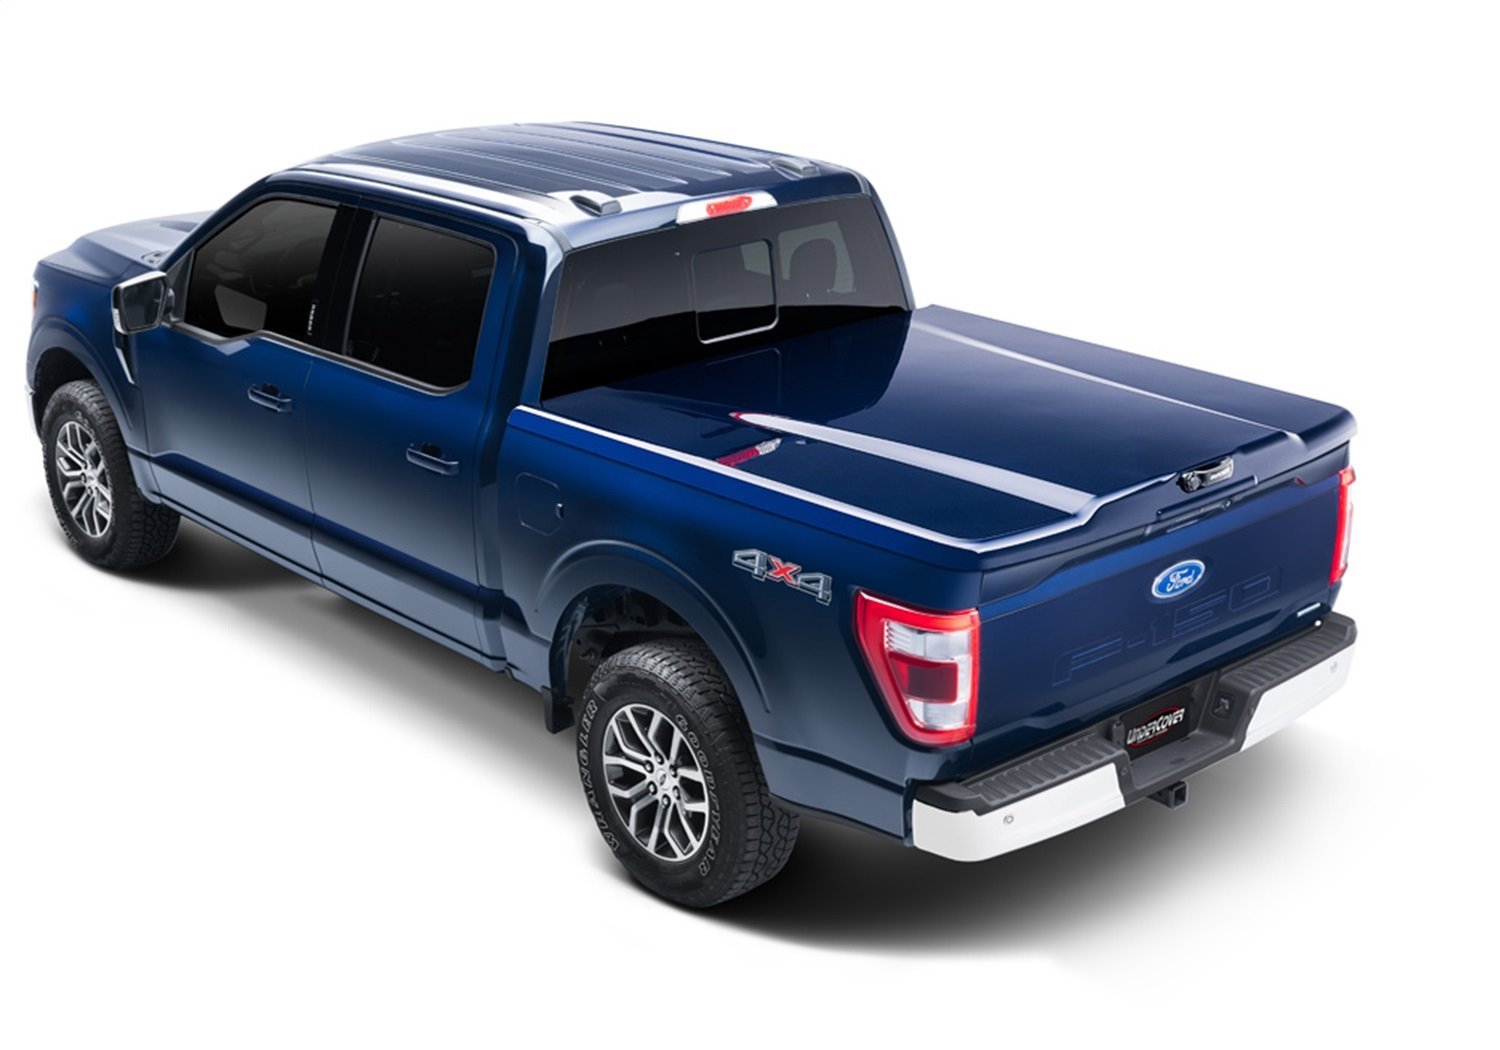 UC2208L-D1 Elite LX Hard Non-Folding Cover, Fits Select Ford F-150 5'7" Bed Crew (Includes Lightning) D1 Stone Gray